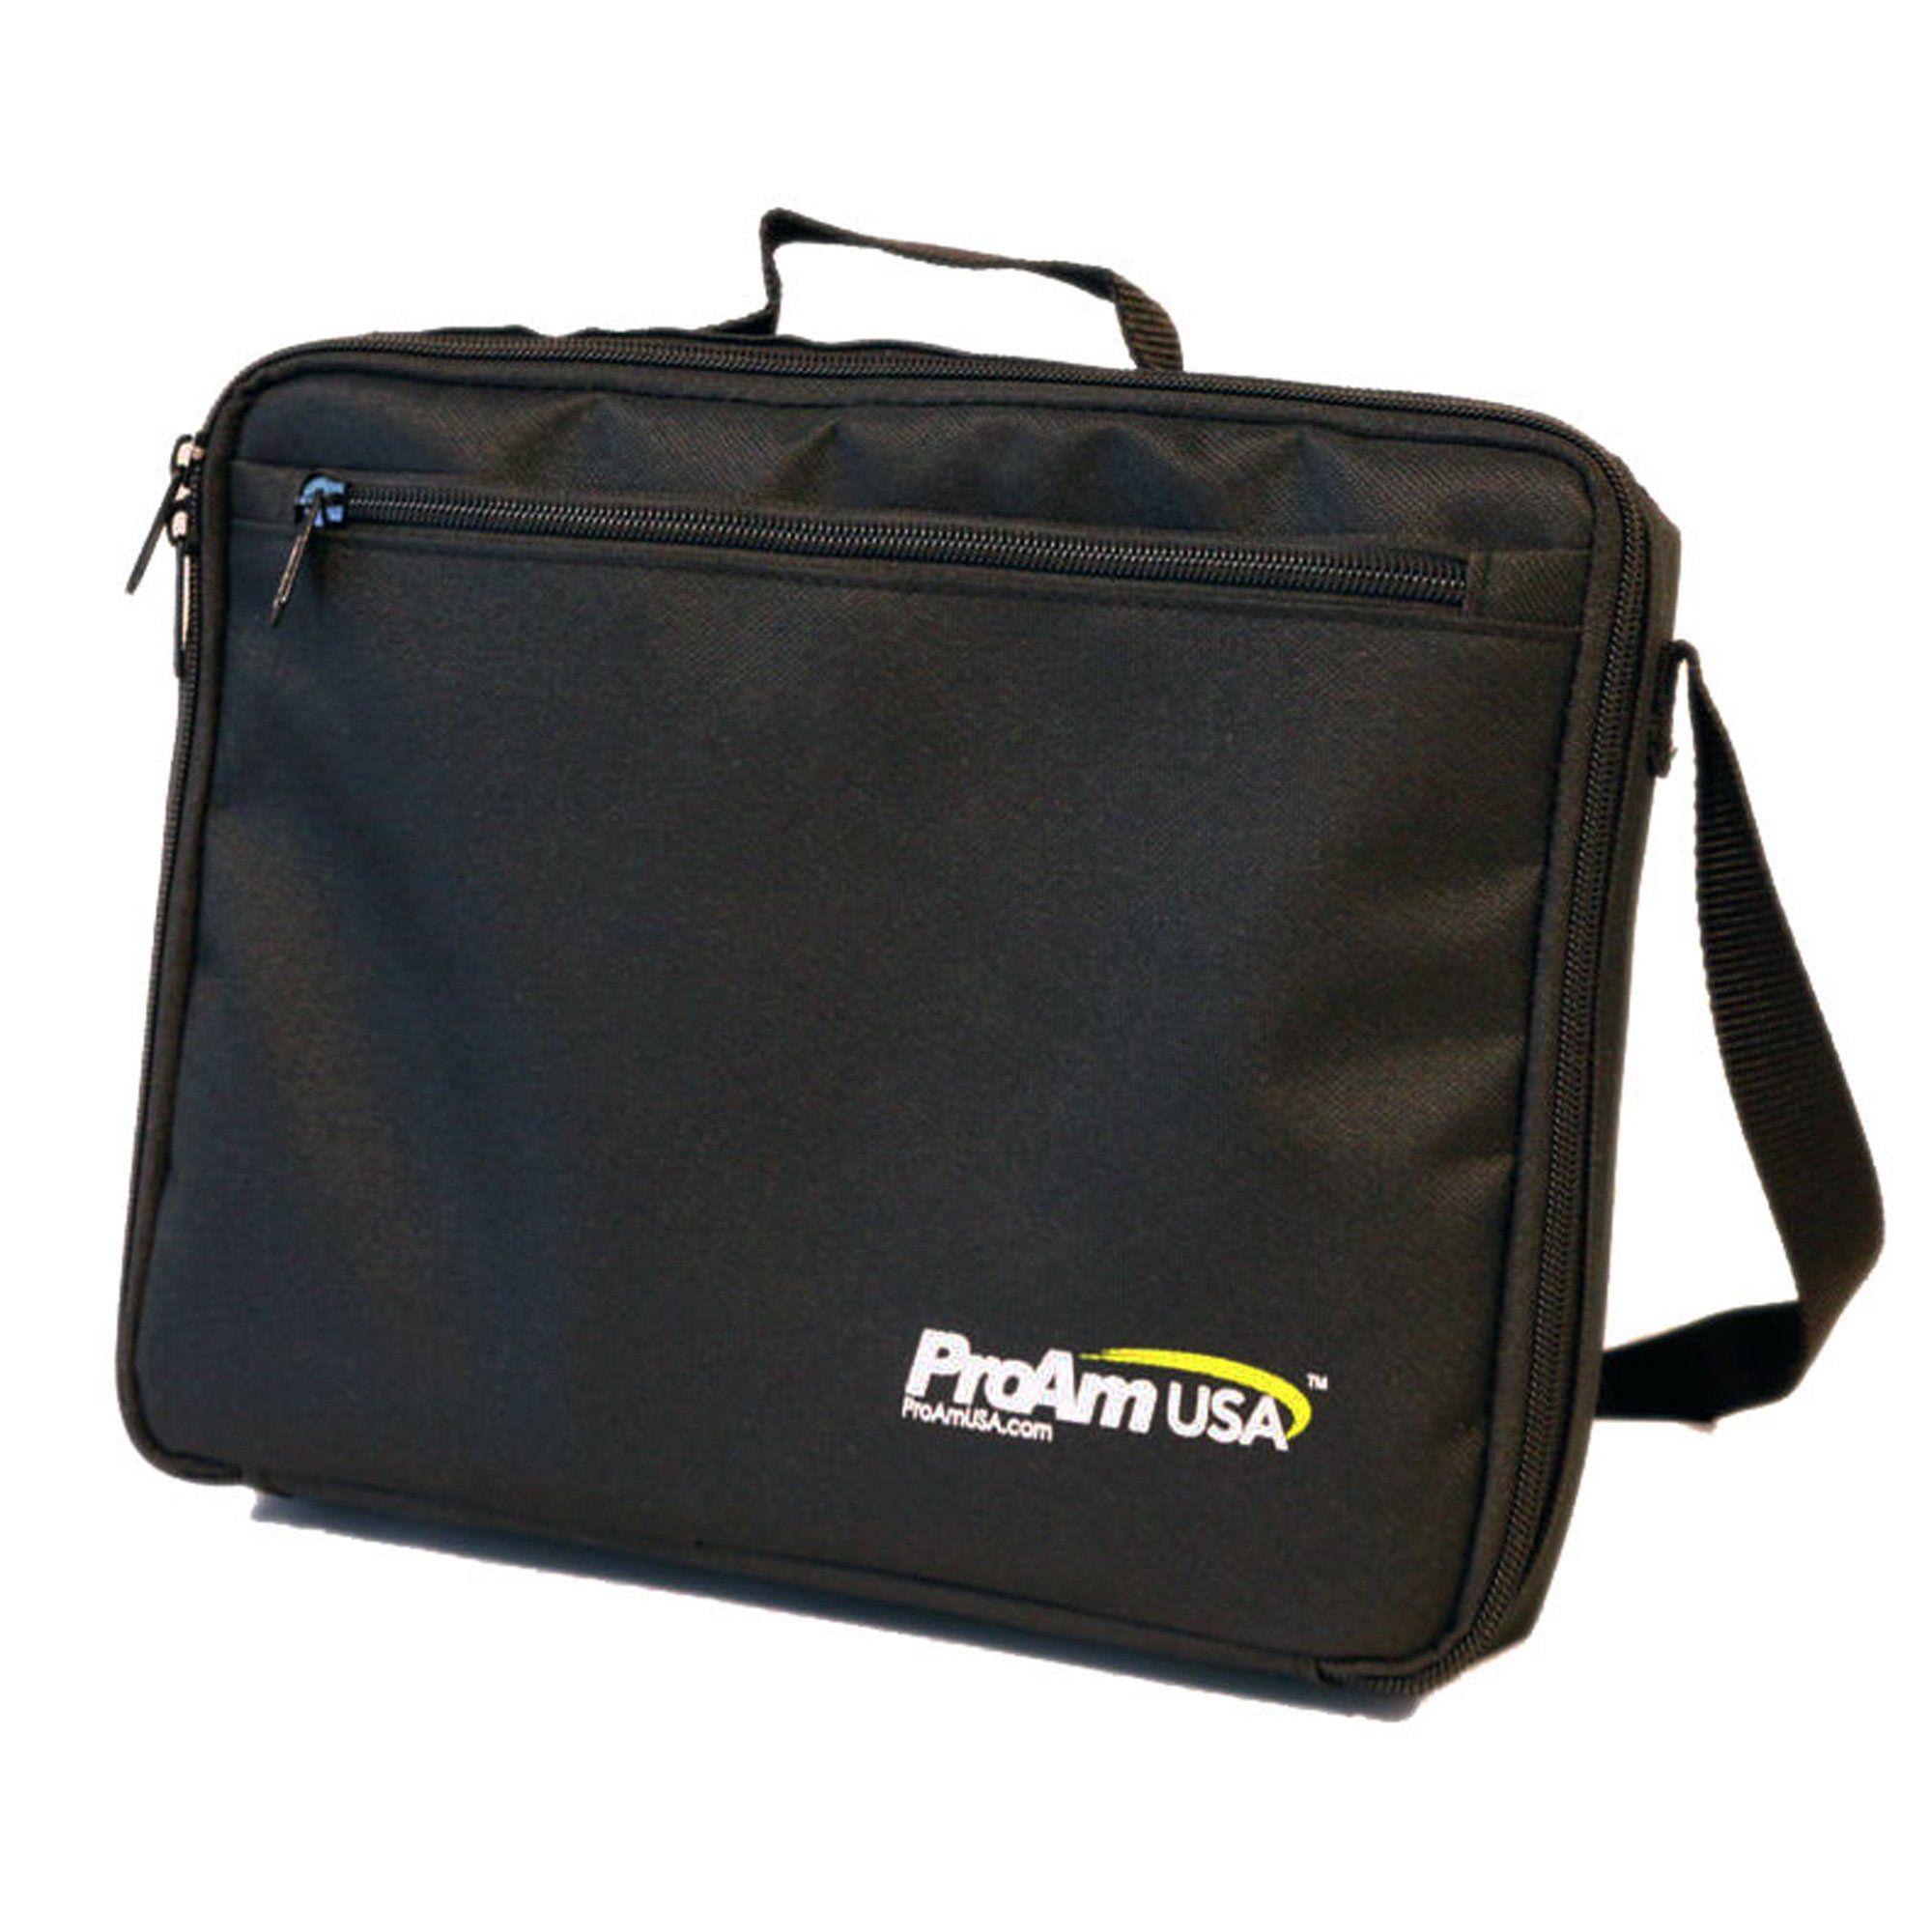 Deep Large Soft Padded Carrying Case for 5 to 7 inch LCD Video Monitors - PRODUCTS